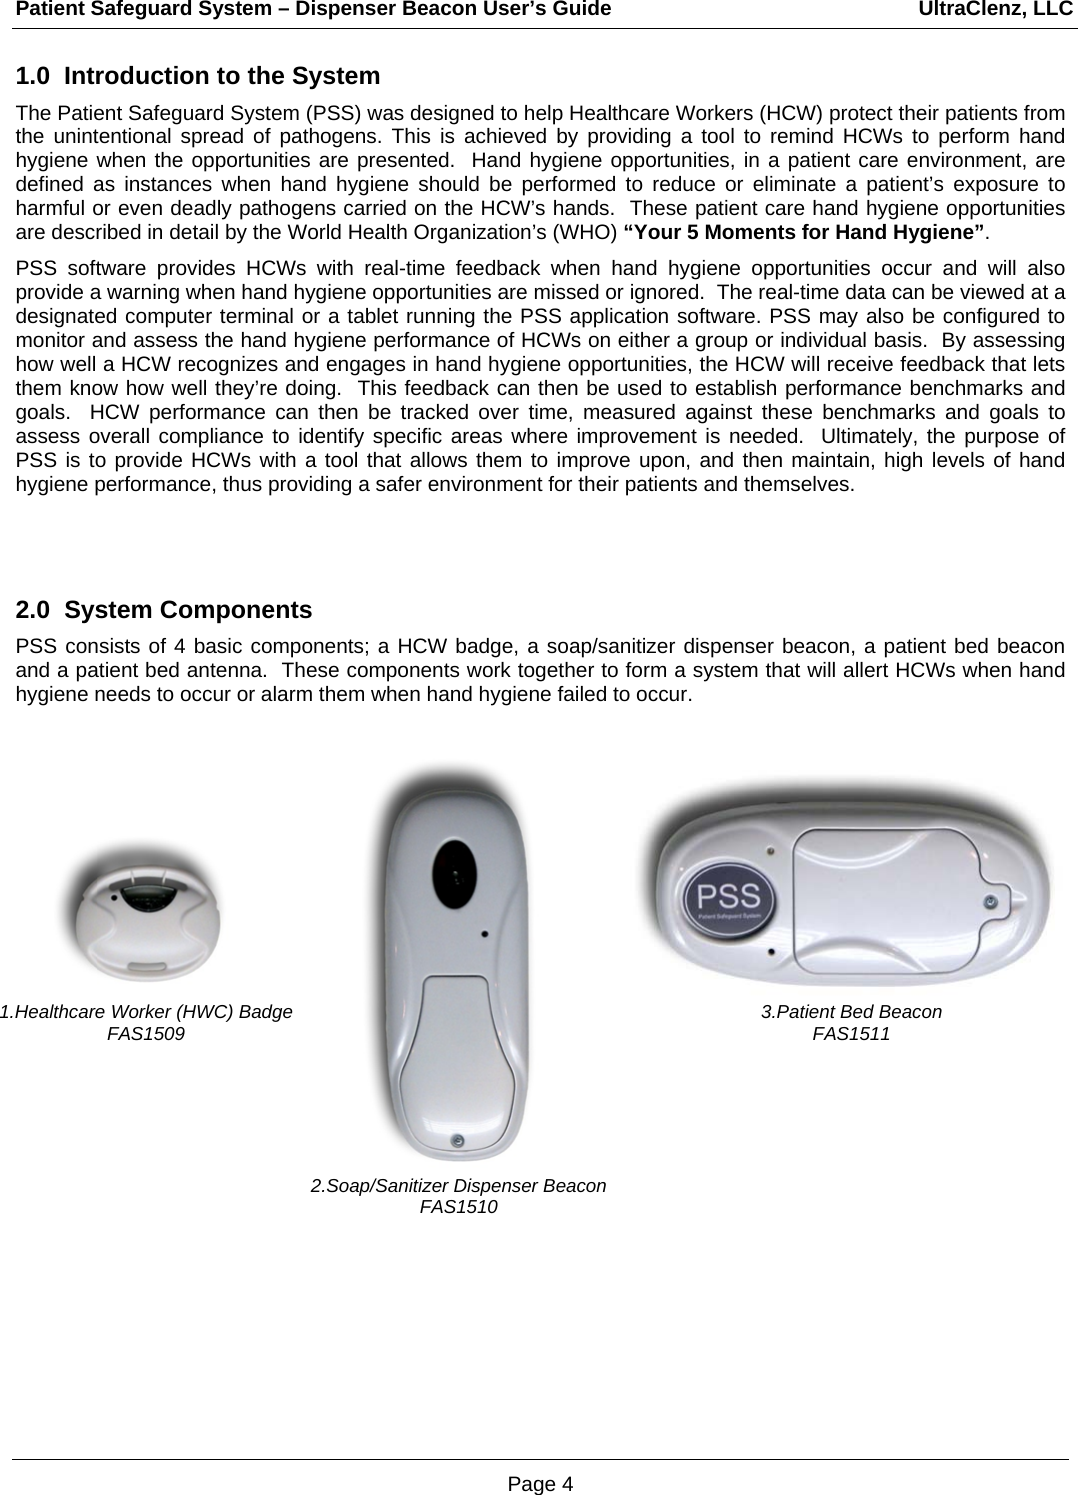 Patient Safeguard System – Dispenser Beacon User’s Guide                                                     UltraClenz, LLC Page 4 1.Healthcare Worker (HWC) Badge FAS1509 1.0  Introduction to the System The Patient Safeguard System (PSS) was designed to help Healthcare Workers (HCW) protect their patients from the unintentional spread of pathogens. This is achieved by providing a tool to remind HCWs to perform hand hygiene when the opportunities are presented.  Hand hygiene opportunities, in a patient care environment, are defined as instances when hand hygiene should be performed to reduce or eliminate a patient’s exposure to harmful or even deadly pathogens carried on the HCW’s hands.  These patient care hand hygiene opportunities are described in detail by the World Health Organization’s (WHO) “Your 5 Moments for Hand Hygiene”.   PSS software provides HCWs with real-time feedback when hand hygiene opportunities occur and will also provide a warning when hand hygiene opportunities are missed or ignored.  The real-time data can be viewed at a designated computer terminal or a tablet running the PSS application software. PSS may also be configured to monitor and assess the hand hygiene performance of HCWs on either a group or individual basis.  By assessing how well a HCW recognizes and engages in hand hygiene opportunities, the HCW will receive feedback that lets them know how well they’re doing.  This feedback can then be used to establish performance benchmarks and goals.  HCW performance can then be tracked over time, measured against these benchmarks and goals to assess overall compliance to identify specific areas where improvement is needed.  Ultimately, the purpose of PSS is to provide HCWs with a tool that allows them to improve upon, and then maintain, high levels of hand hygiene performance, thus providing a safer environment for their patients and themselves.   2.0  System Components  PSS consists of 4 basic components; a HCW badge, a soap/sanitizer dispenser beacon, a patient bed beacon and a patient bed antenna.  These components work together to form a system that will allert HCWs when hand hygiene needs to occur or alarm them when hand hygiene failed to occur.                        3.Patient Bed Beacon FAS1511 2.Soap/Sanitizer Dispenser Beacon FAS1510 